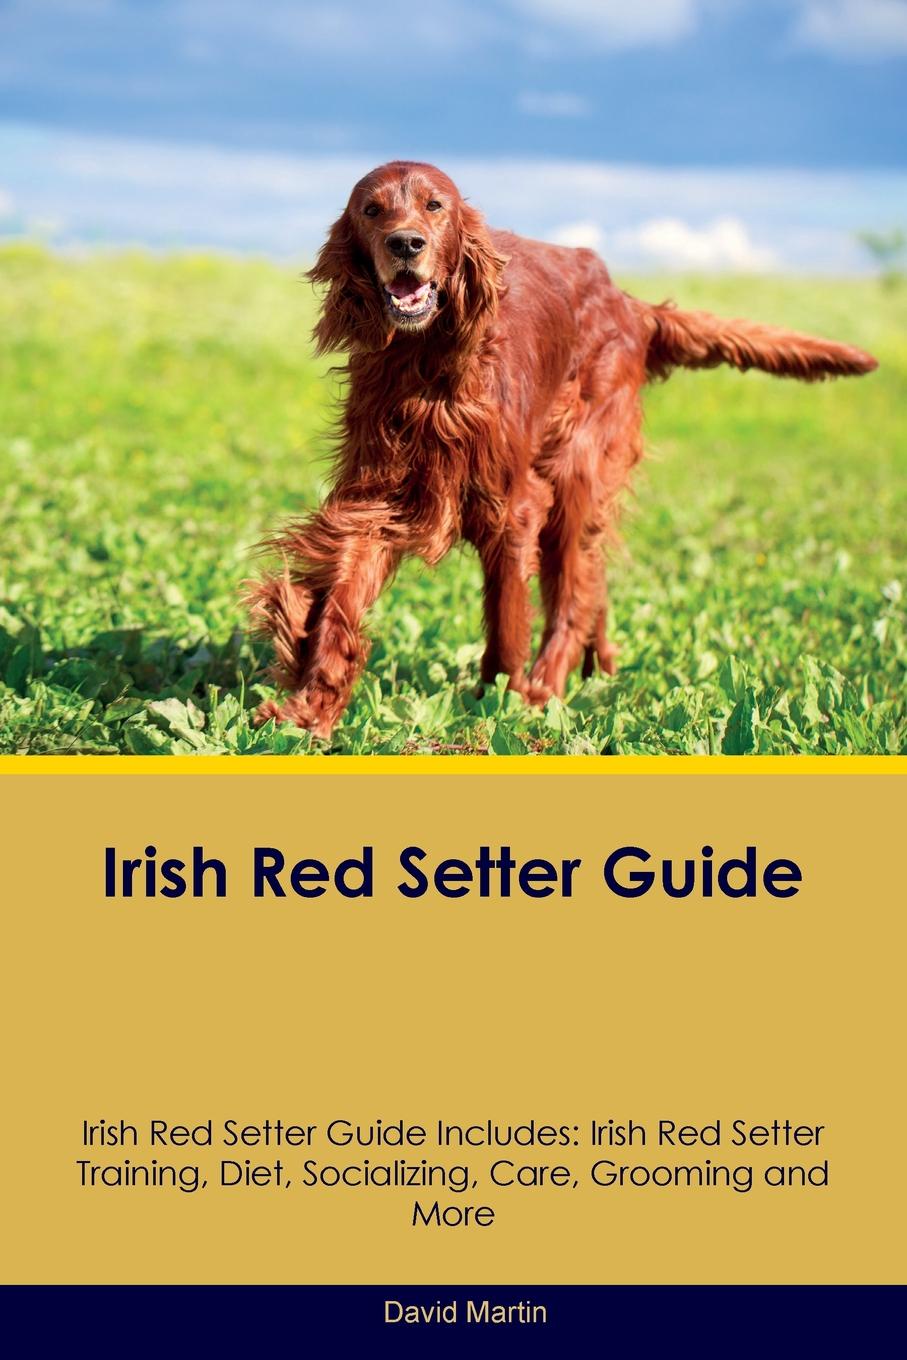 Irish Red Setter Guide Irish Red Setter Guide Includes. Irish Red Setter Training, Diet, Socializing, Care, Grooming, Breeding and More